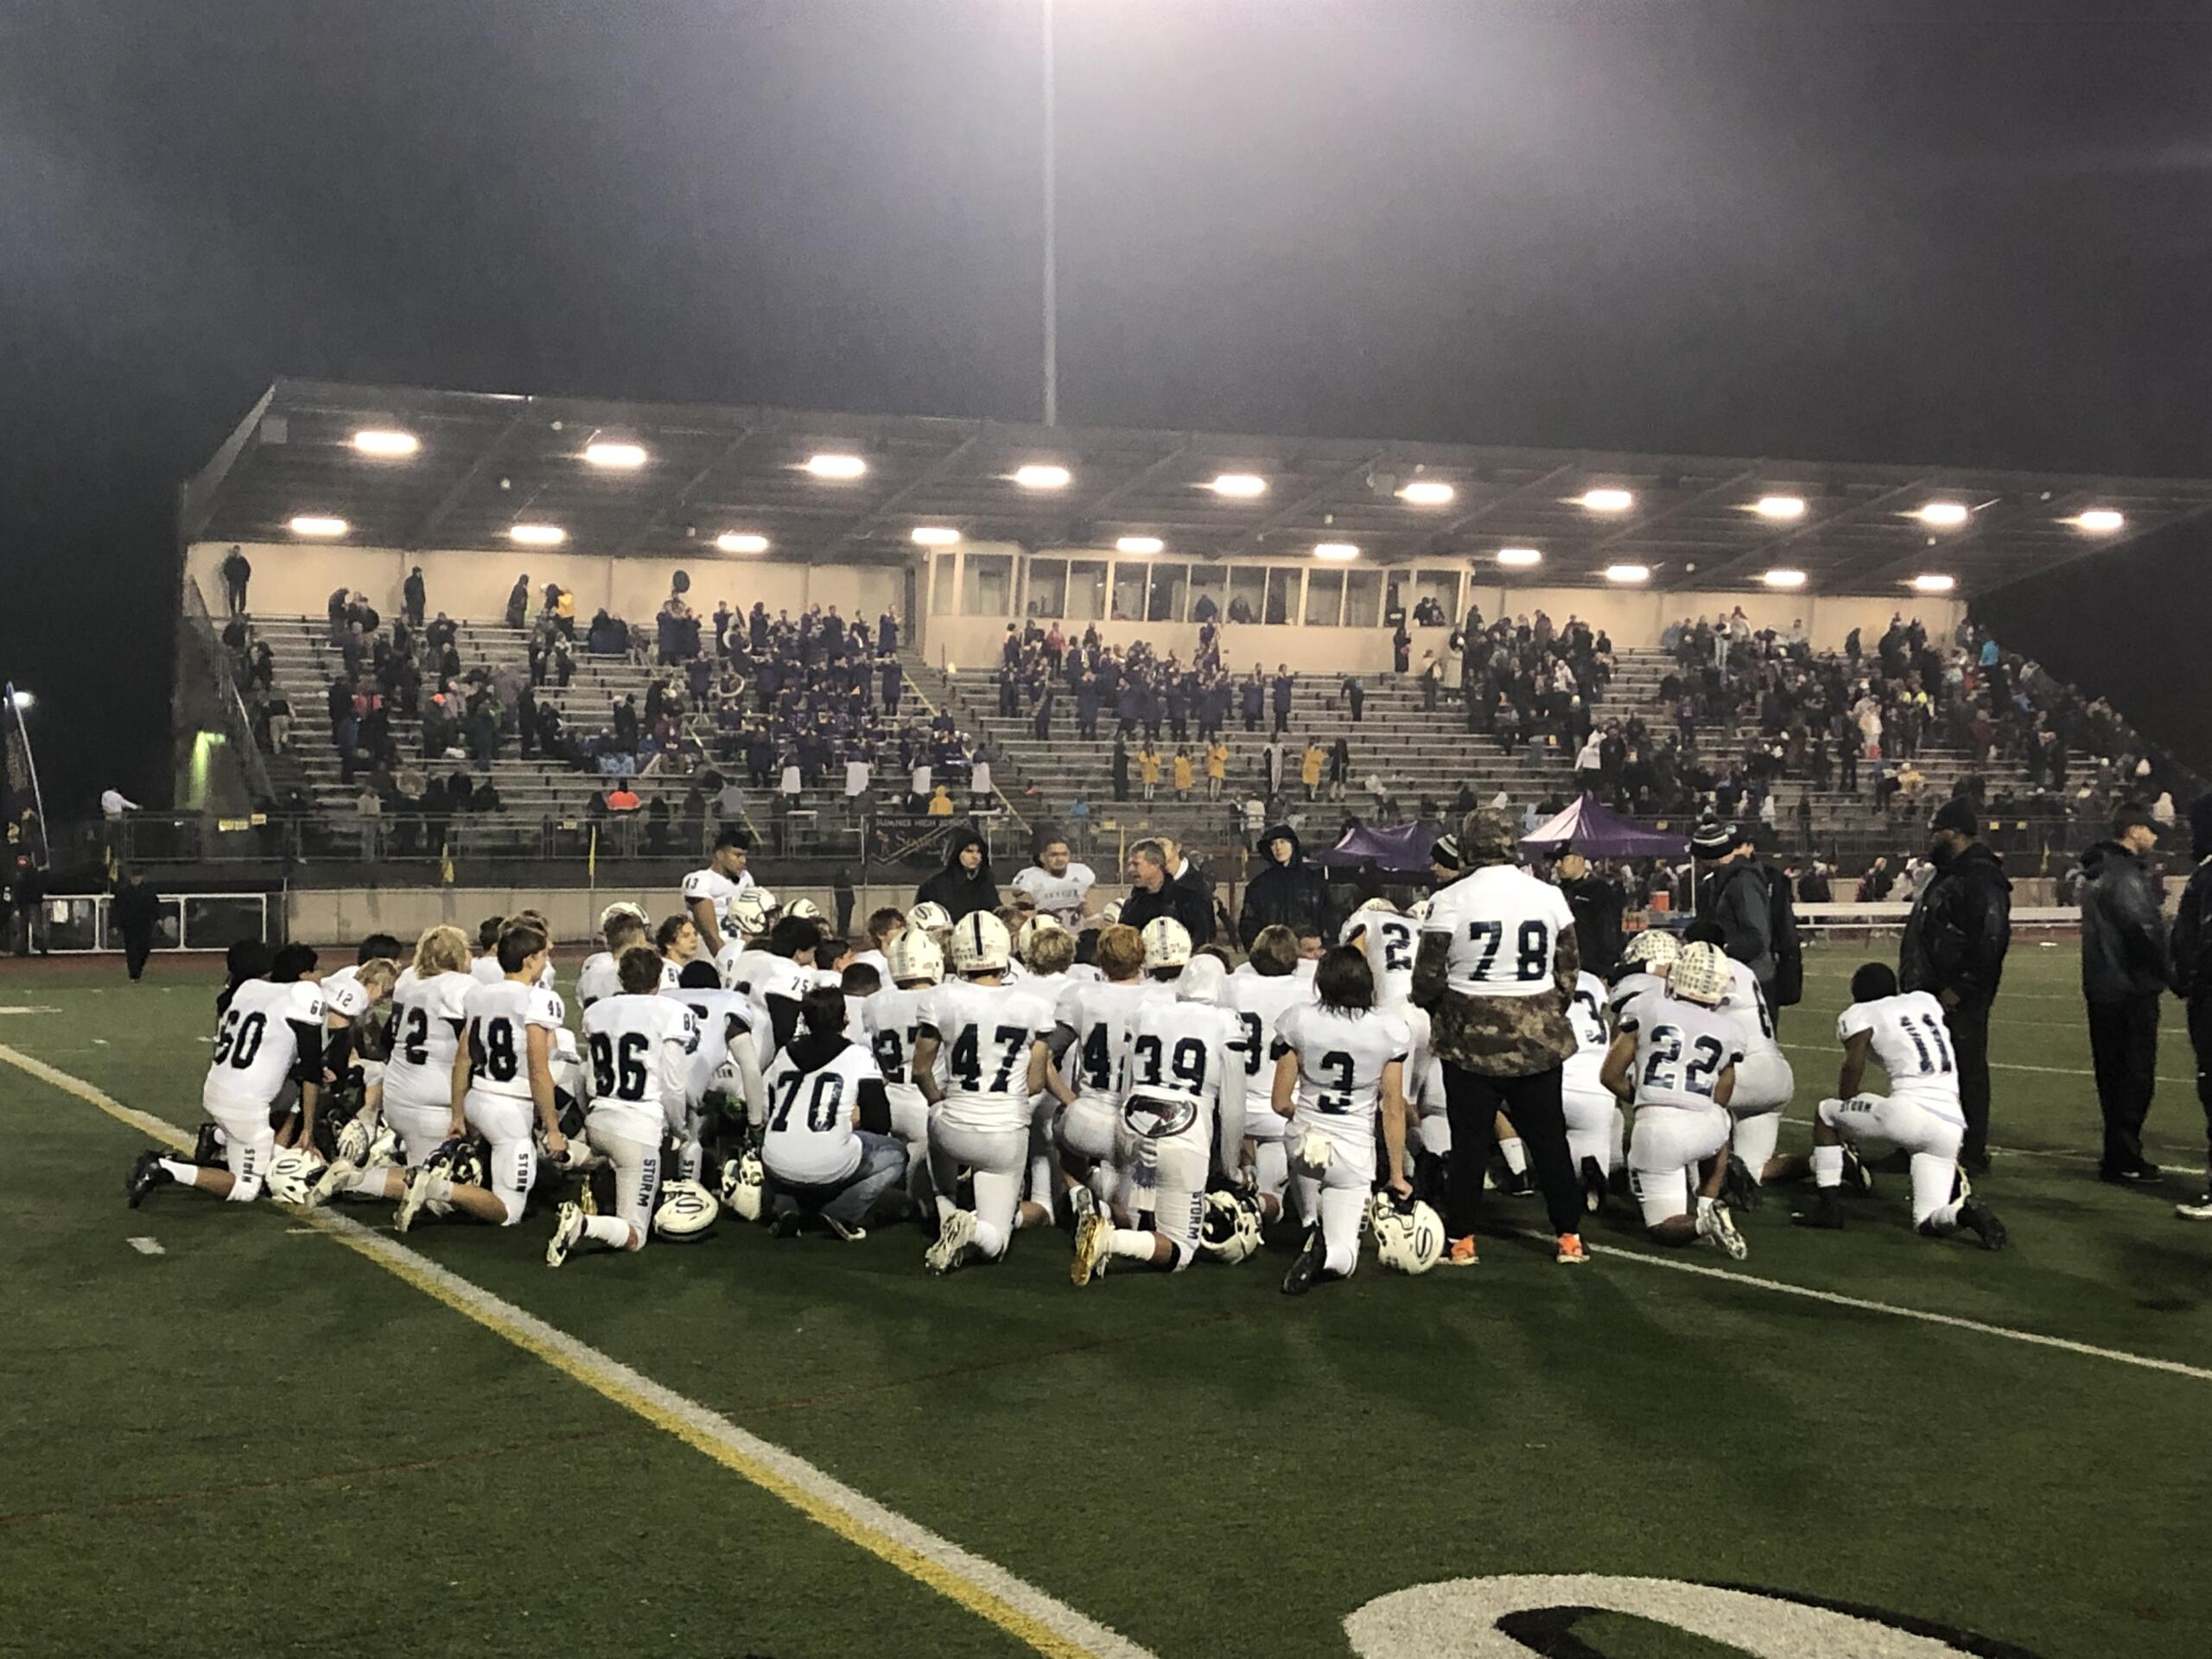 The Skyview football team huddles around coach Steve Kizer after a 24-10 loss to Sumner in the first round of the Class 4A state playoffs on Saturday in Sumner.